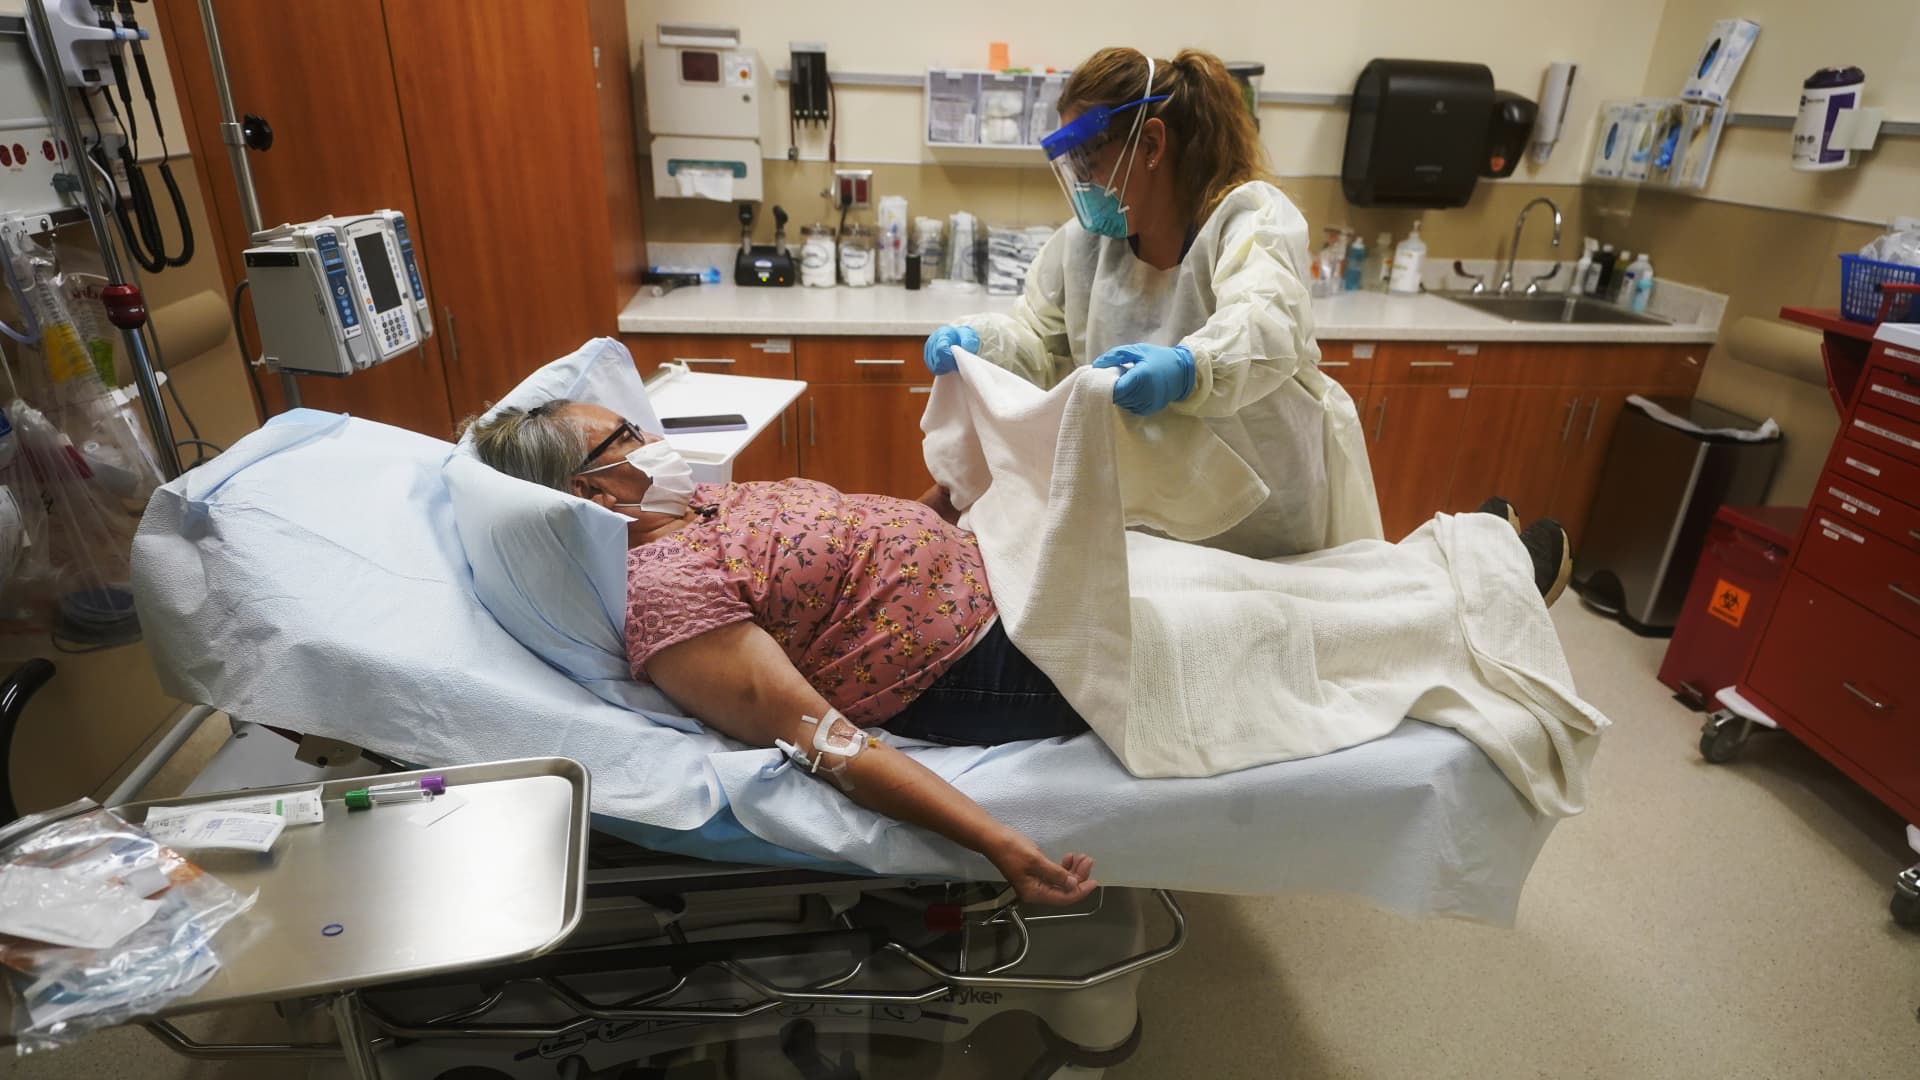 Angie Cleary, a registered nurse, cares for Joyce Johnson-Albert as she receives an antibody infusion while lying on a bed in a trauma room at the Upper Tanana Health Center Wednesday, Sept. 22, 2021, in Tok, Alaska.